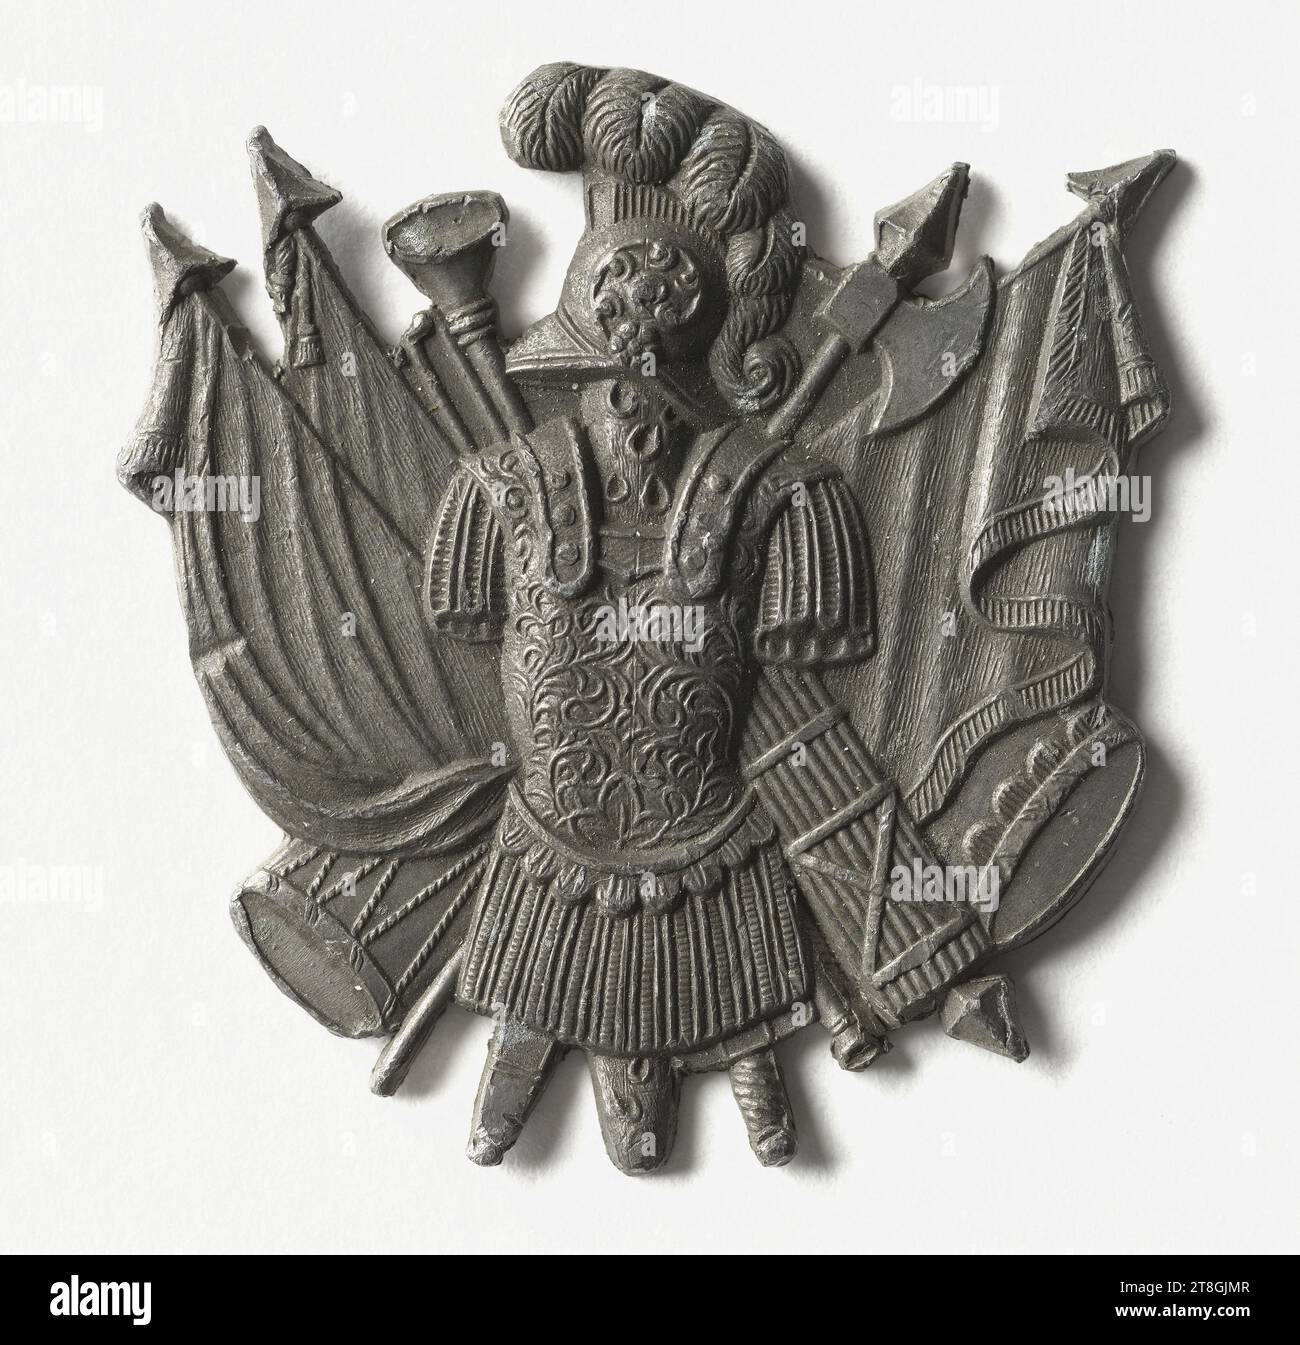 Trophy composed of an antique cuirass surmounted by a crested helmet and placed on a lictor's bundle and an ax in saltire, four flags, and a drum, s. d., Medal engraver, 19th century, Numismatics, Medal, Zinc, Dimensions - Work: Height: 4 cm, Width: 3.2 cm, Weight (type dimension): 17.82 g Stock Photo